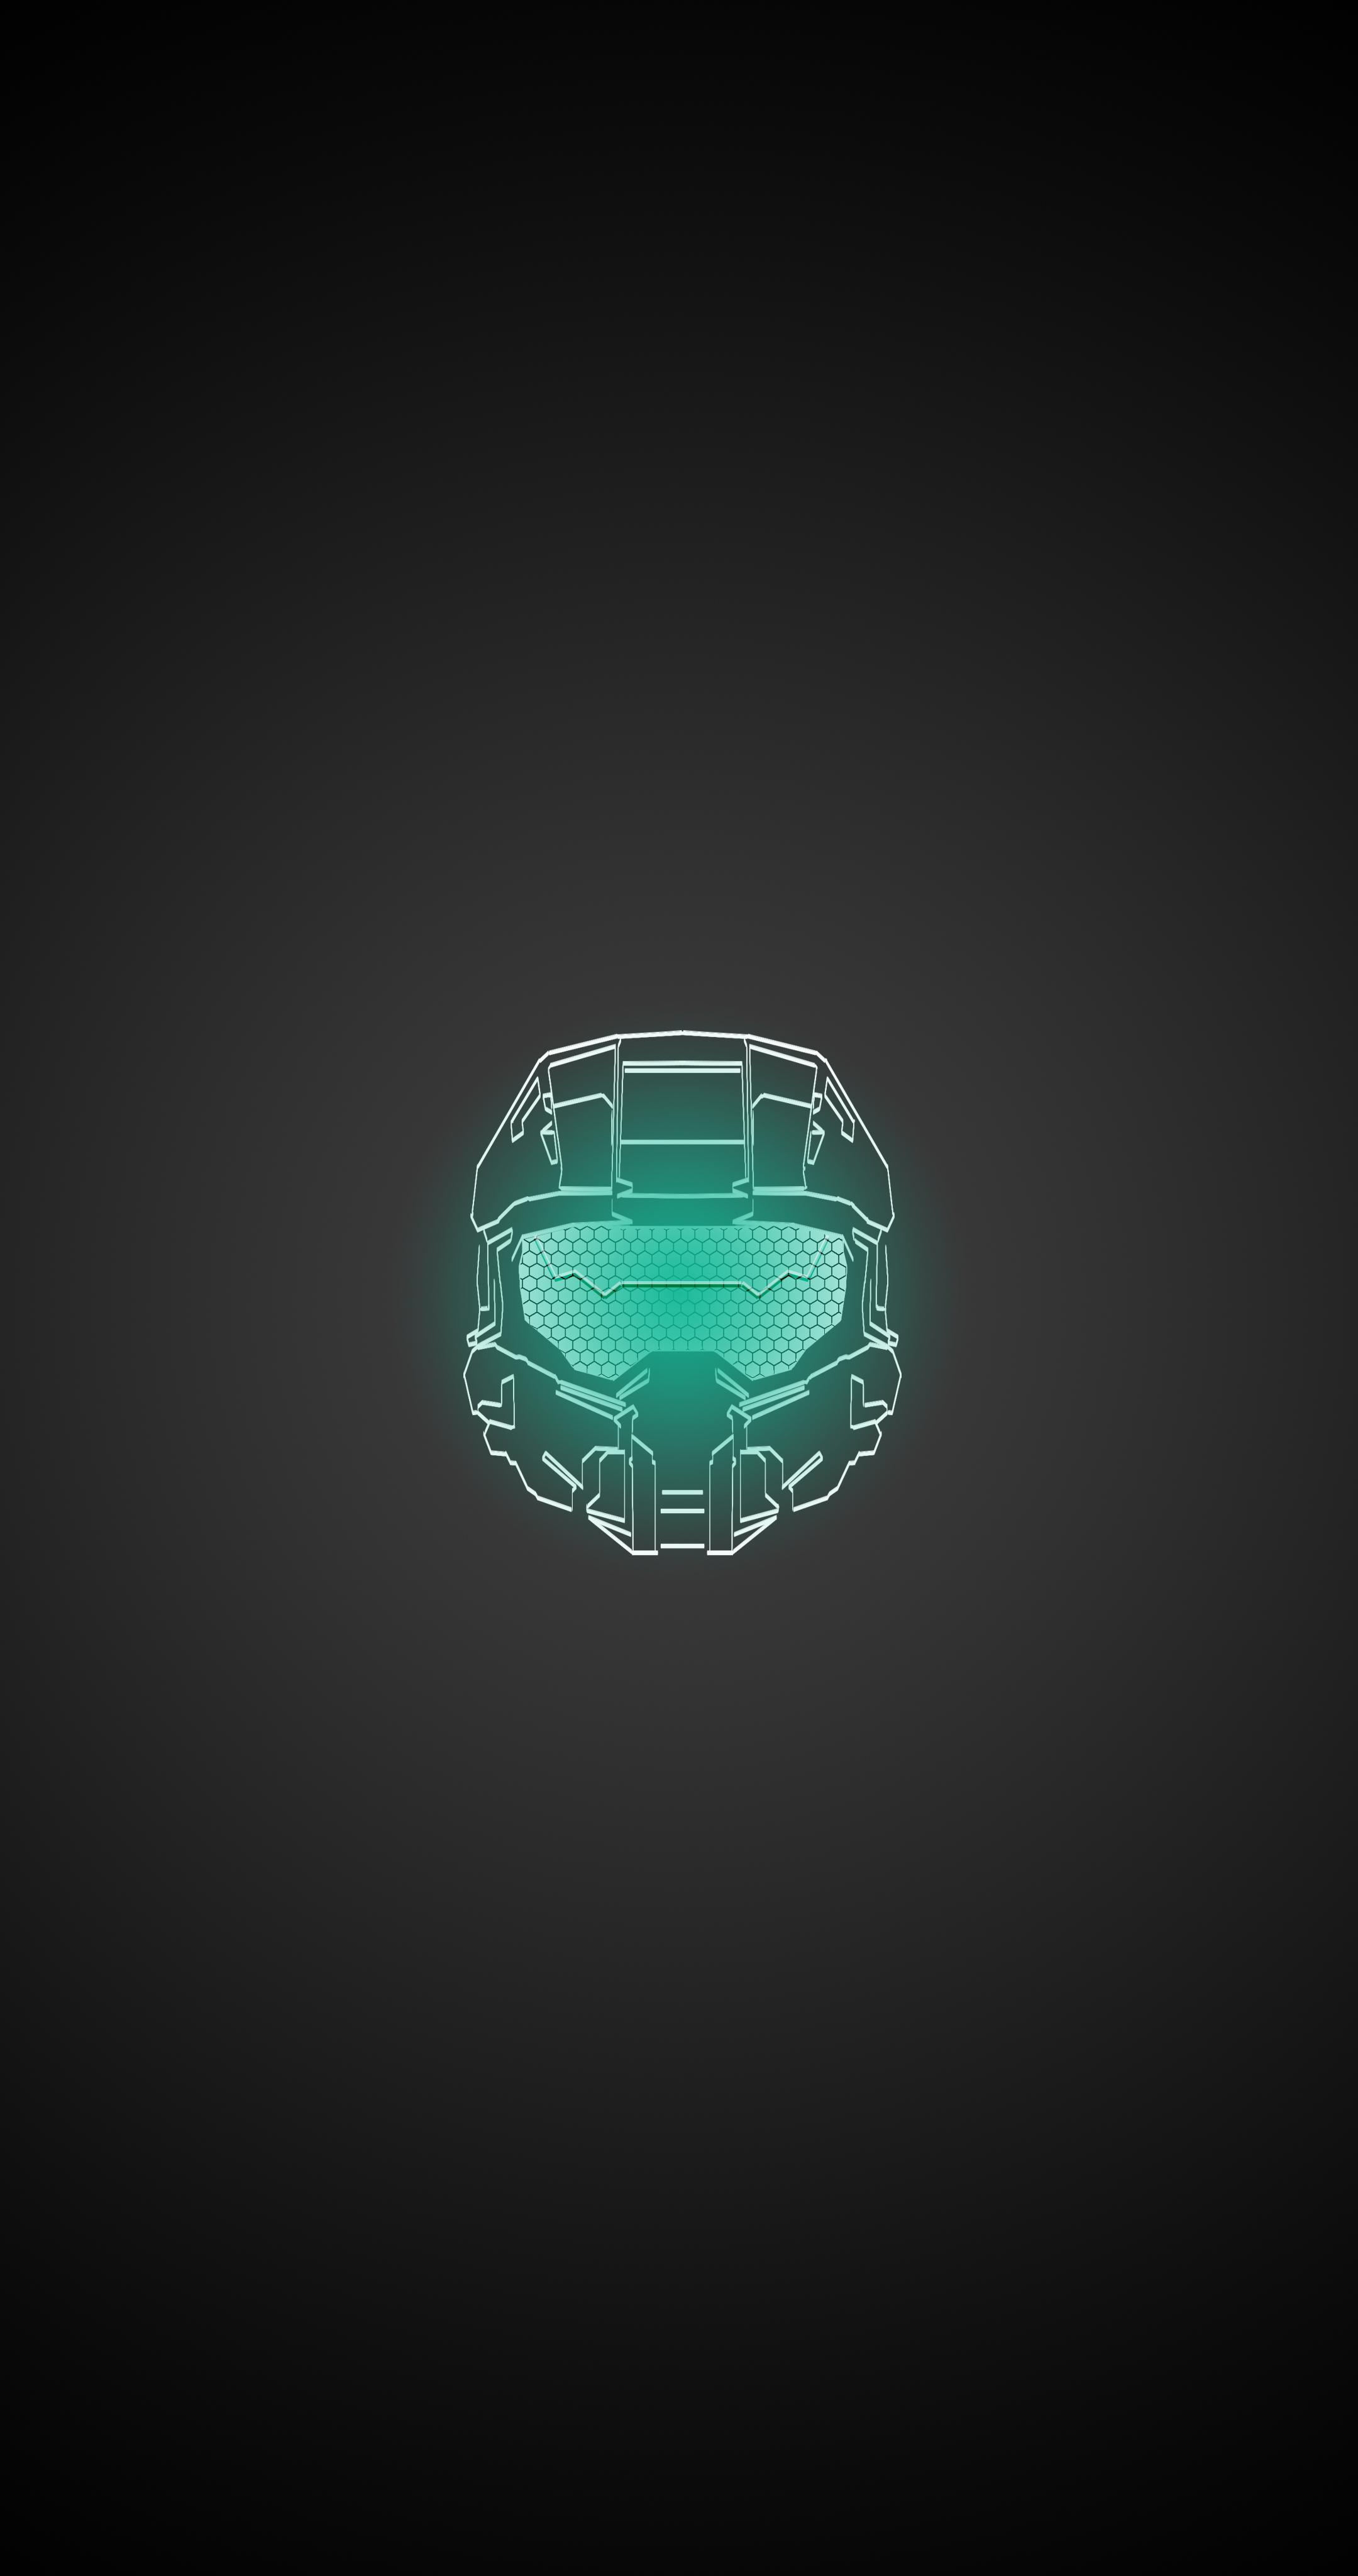 Halo 5 wallpapers HD 4K Phone - 18